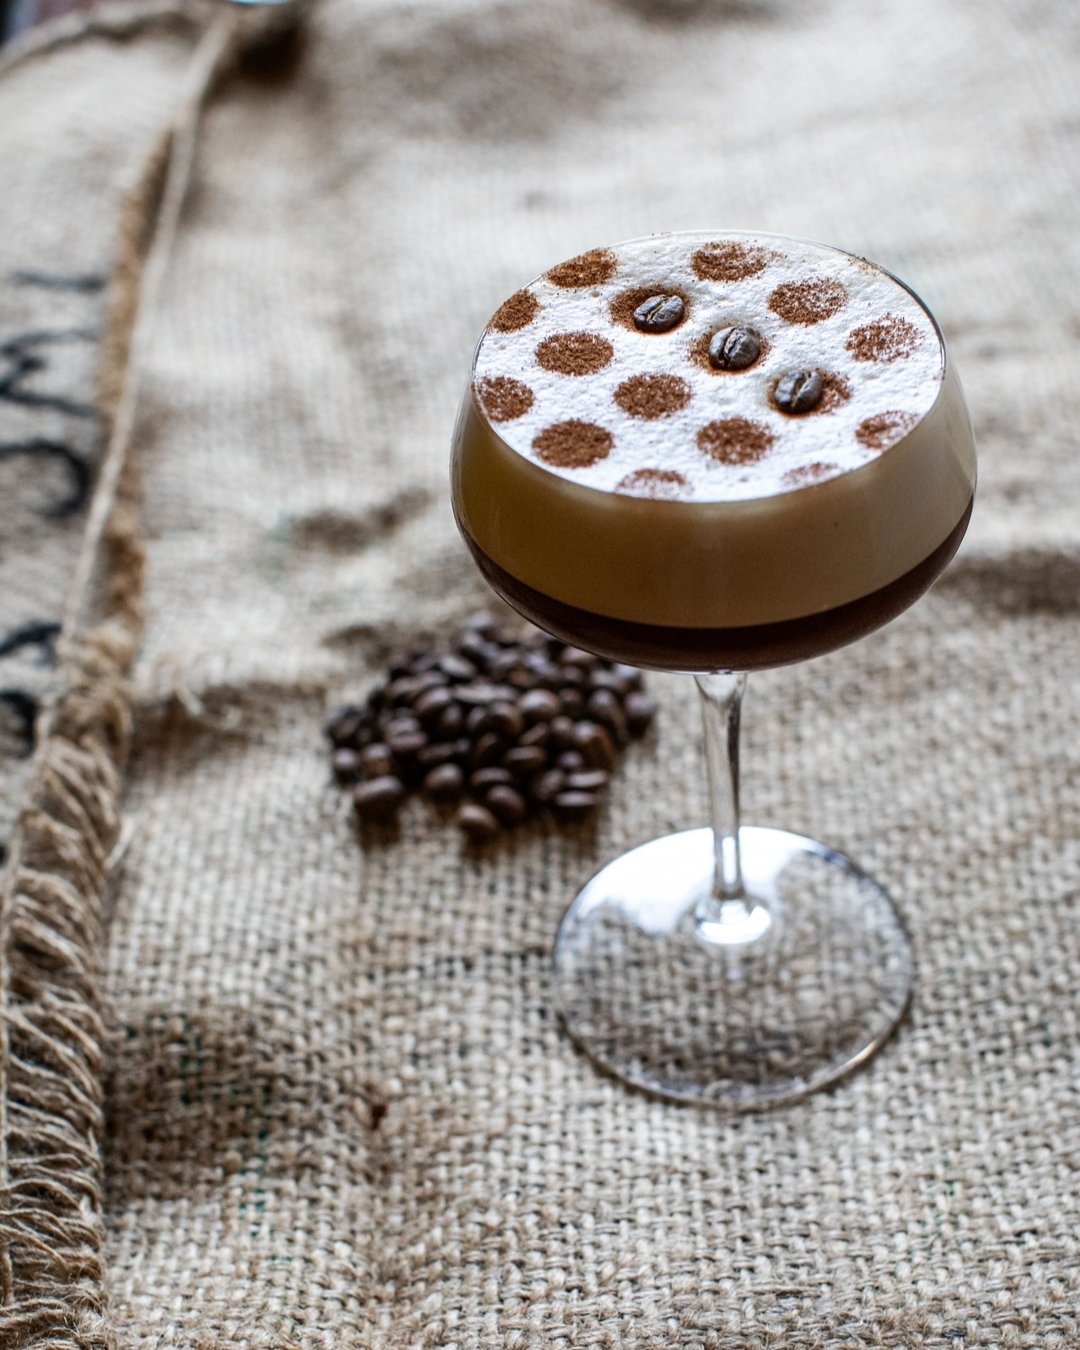 A harmonious blend of bold coffee notes and smooth liqueur. Join us for a taste of sophistication and let this exquisite libation ignite your senses in the most delightful way.
.
#espressomartini #bar #cocktailbar #visitbaltimore